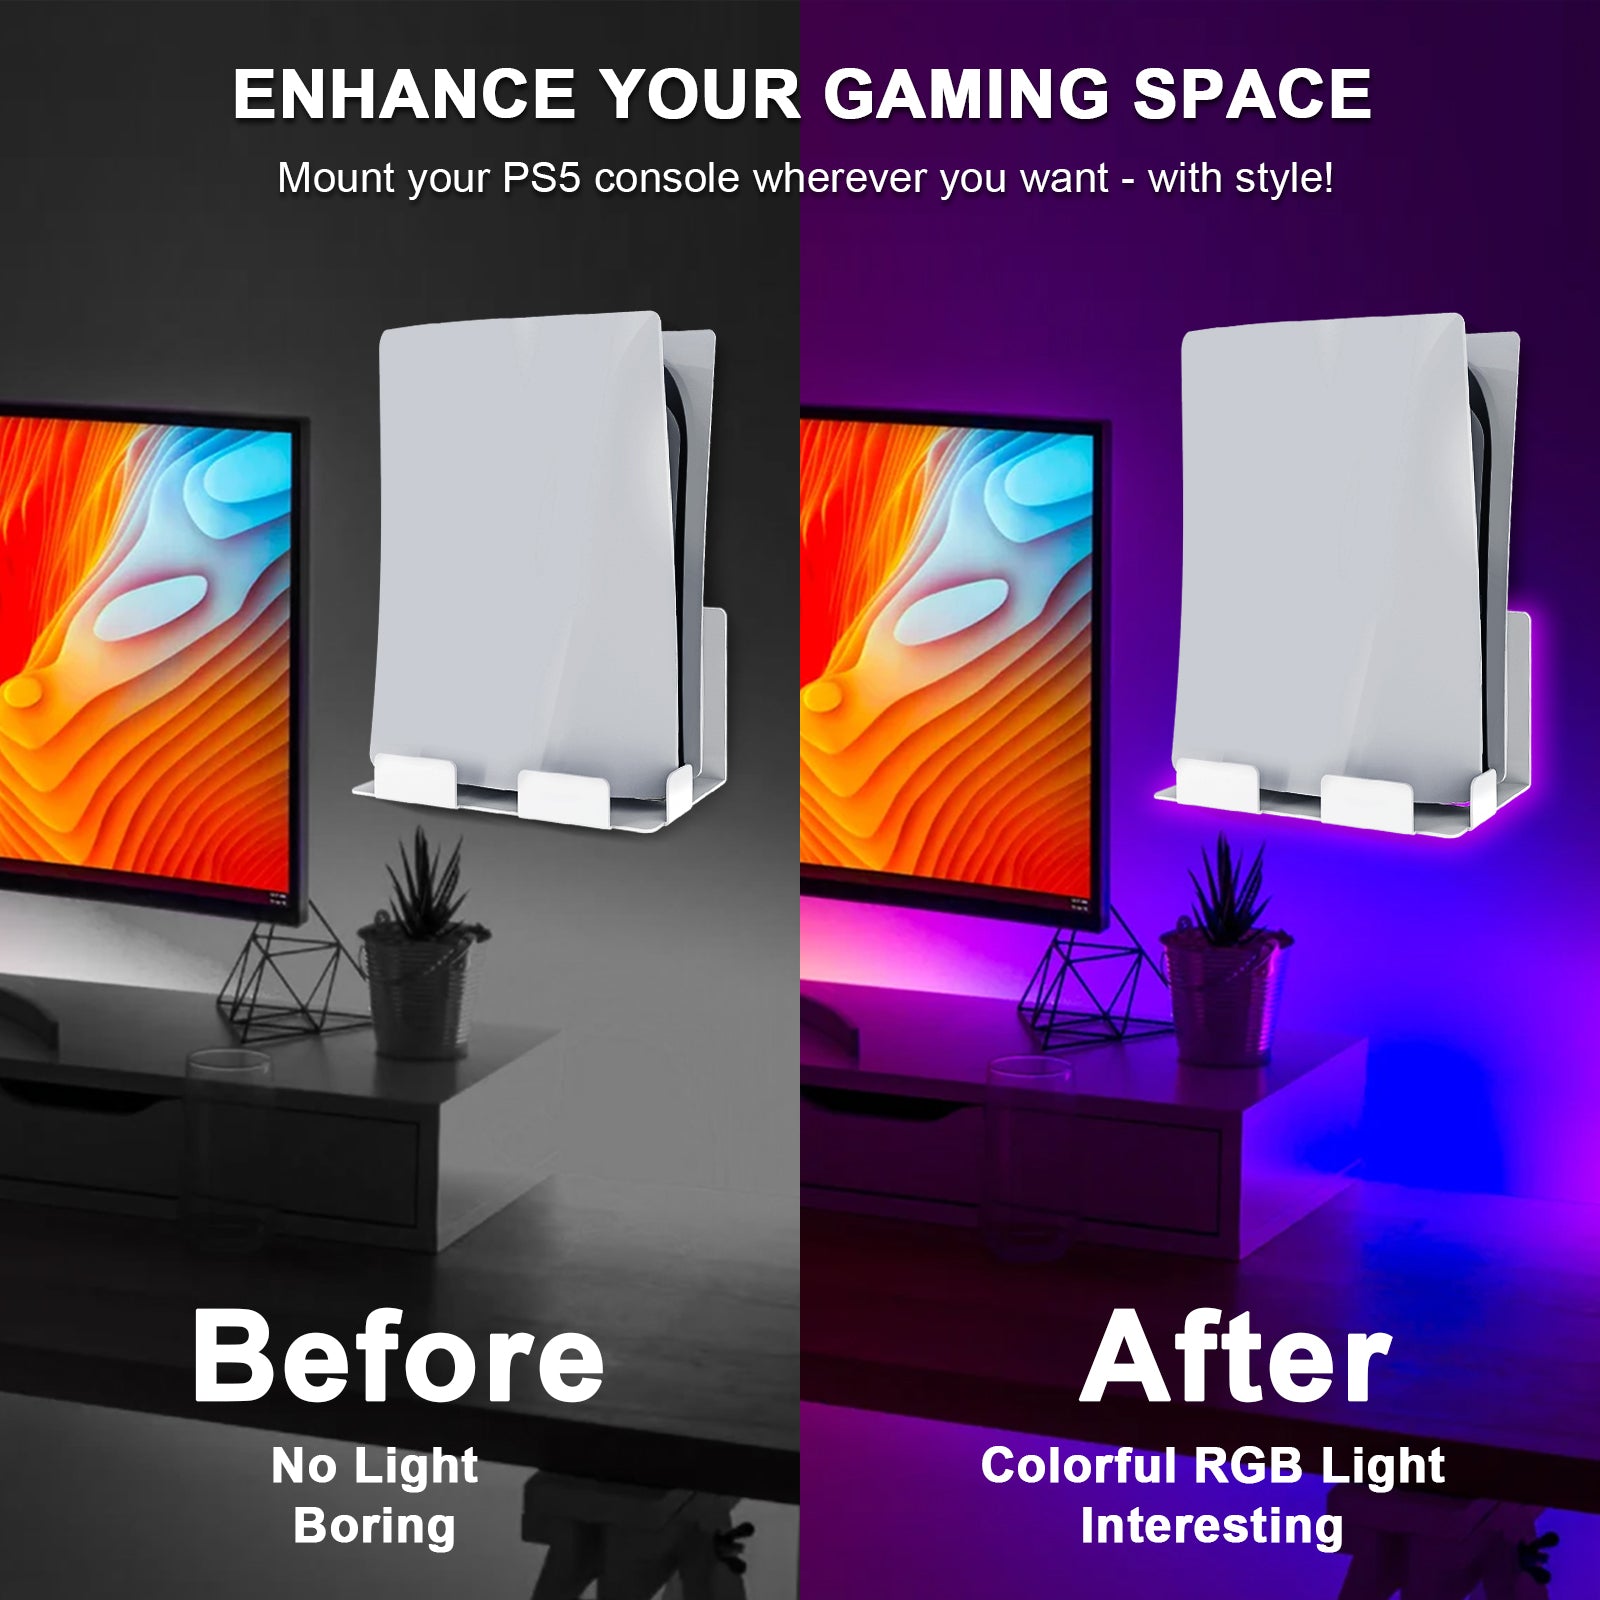 Enhance your gaming space ambiance by stylishly placing the PS5 console wherever you desire!